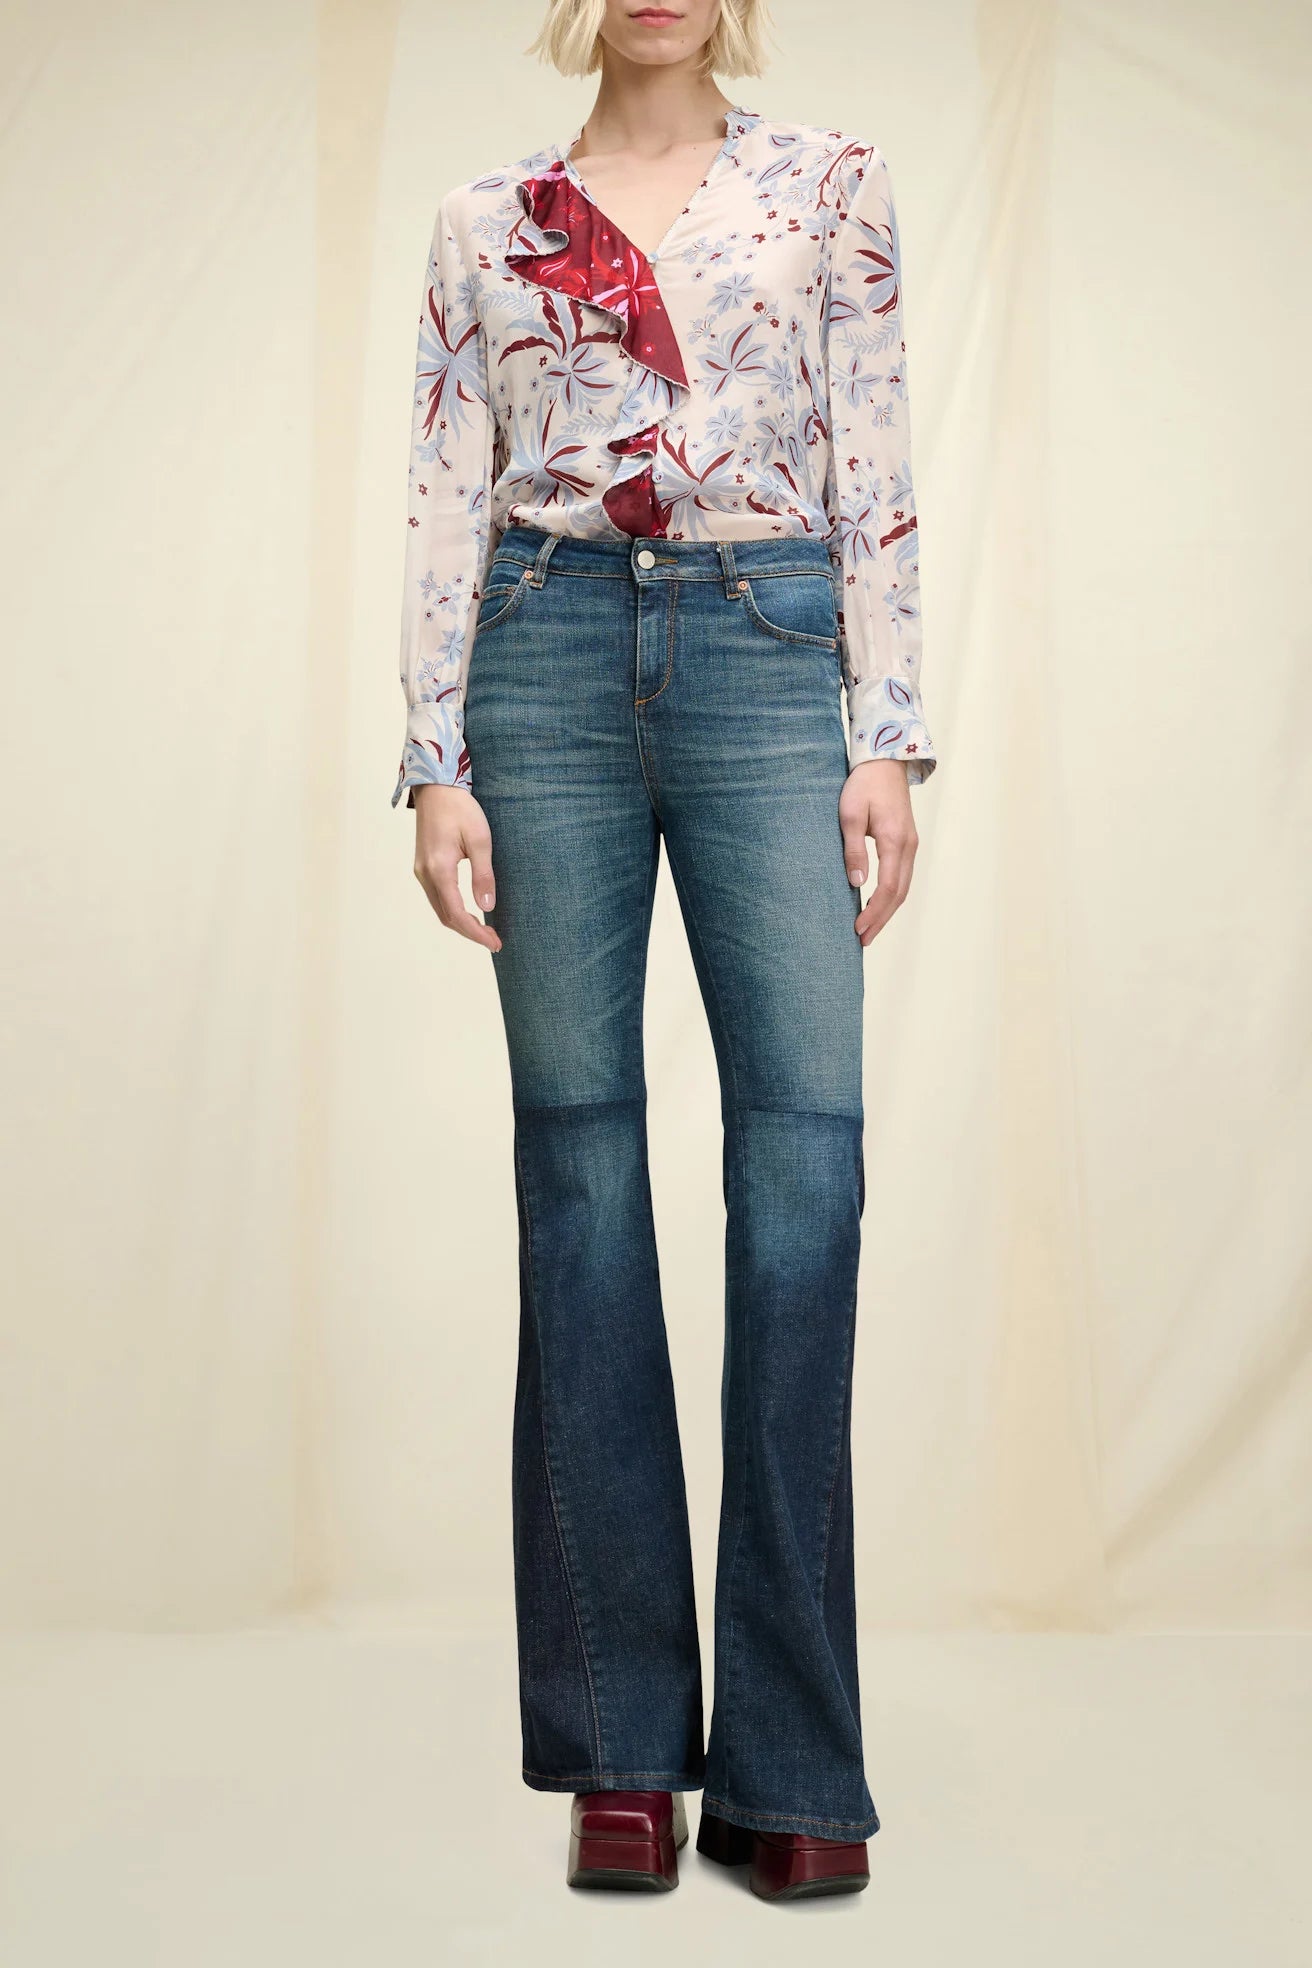 Blooming blend blouse by Dorothee Schumacher